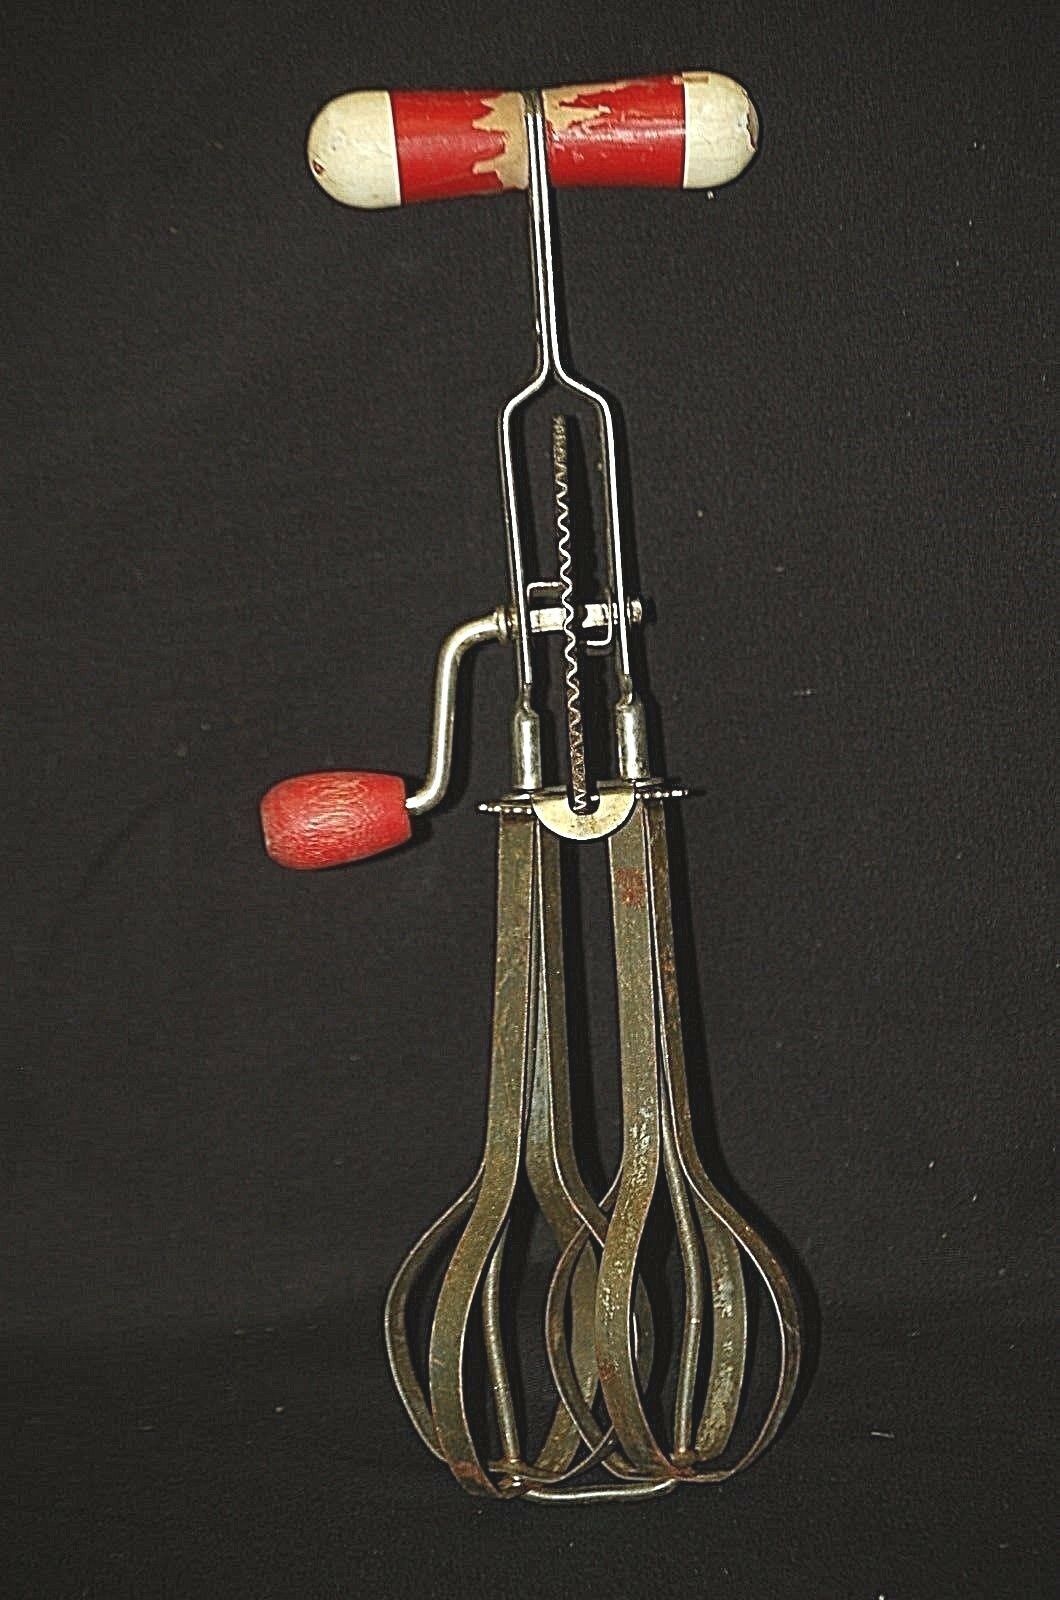 Old Vintage A&J Ekco Egg Beater Hand Mixer Red & Cream Wooden Handle ...